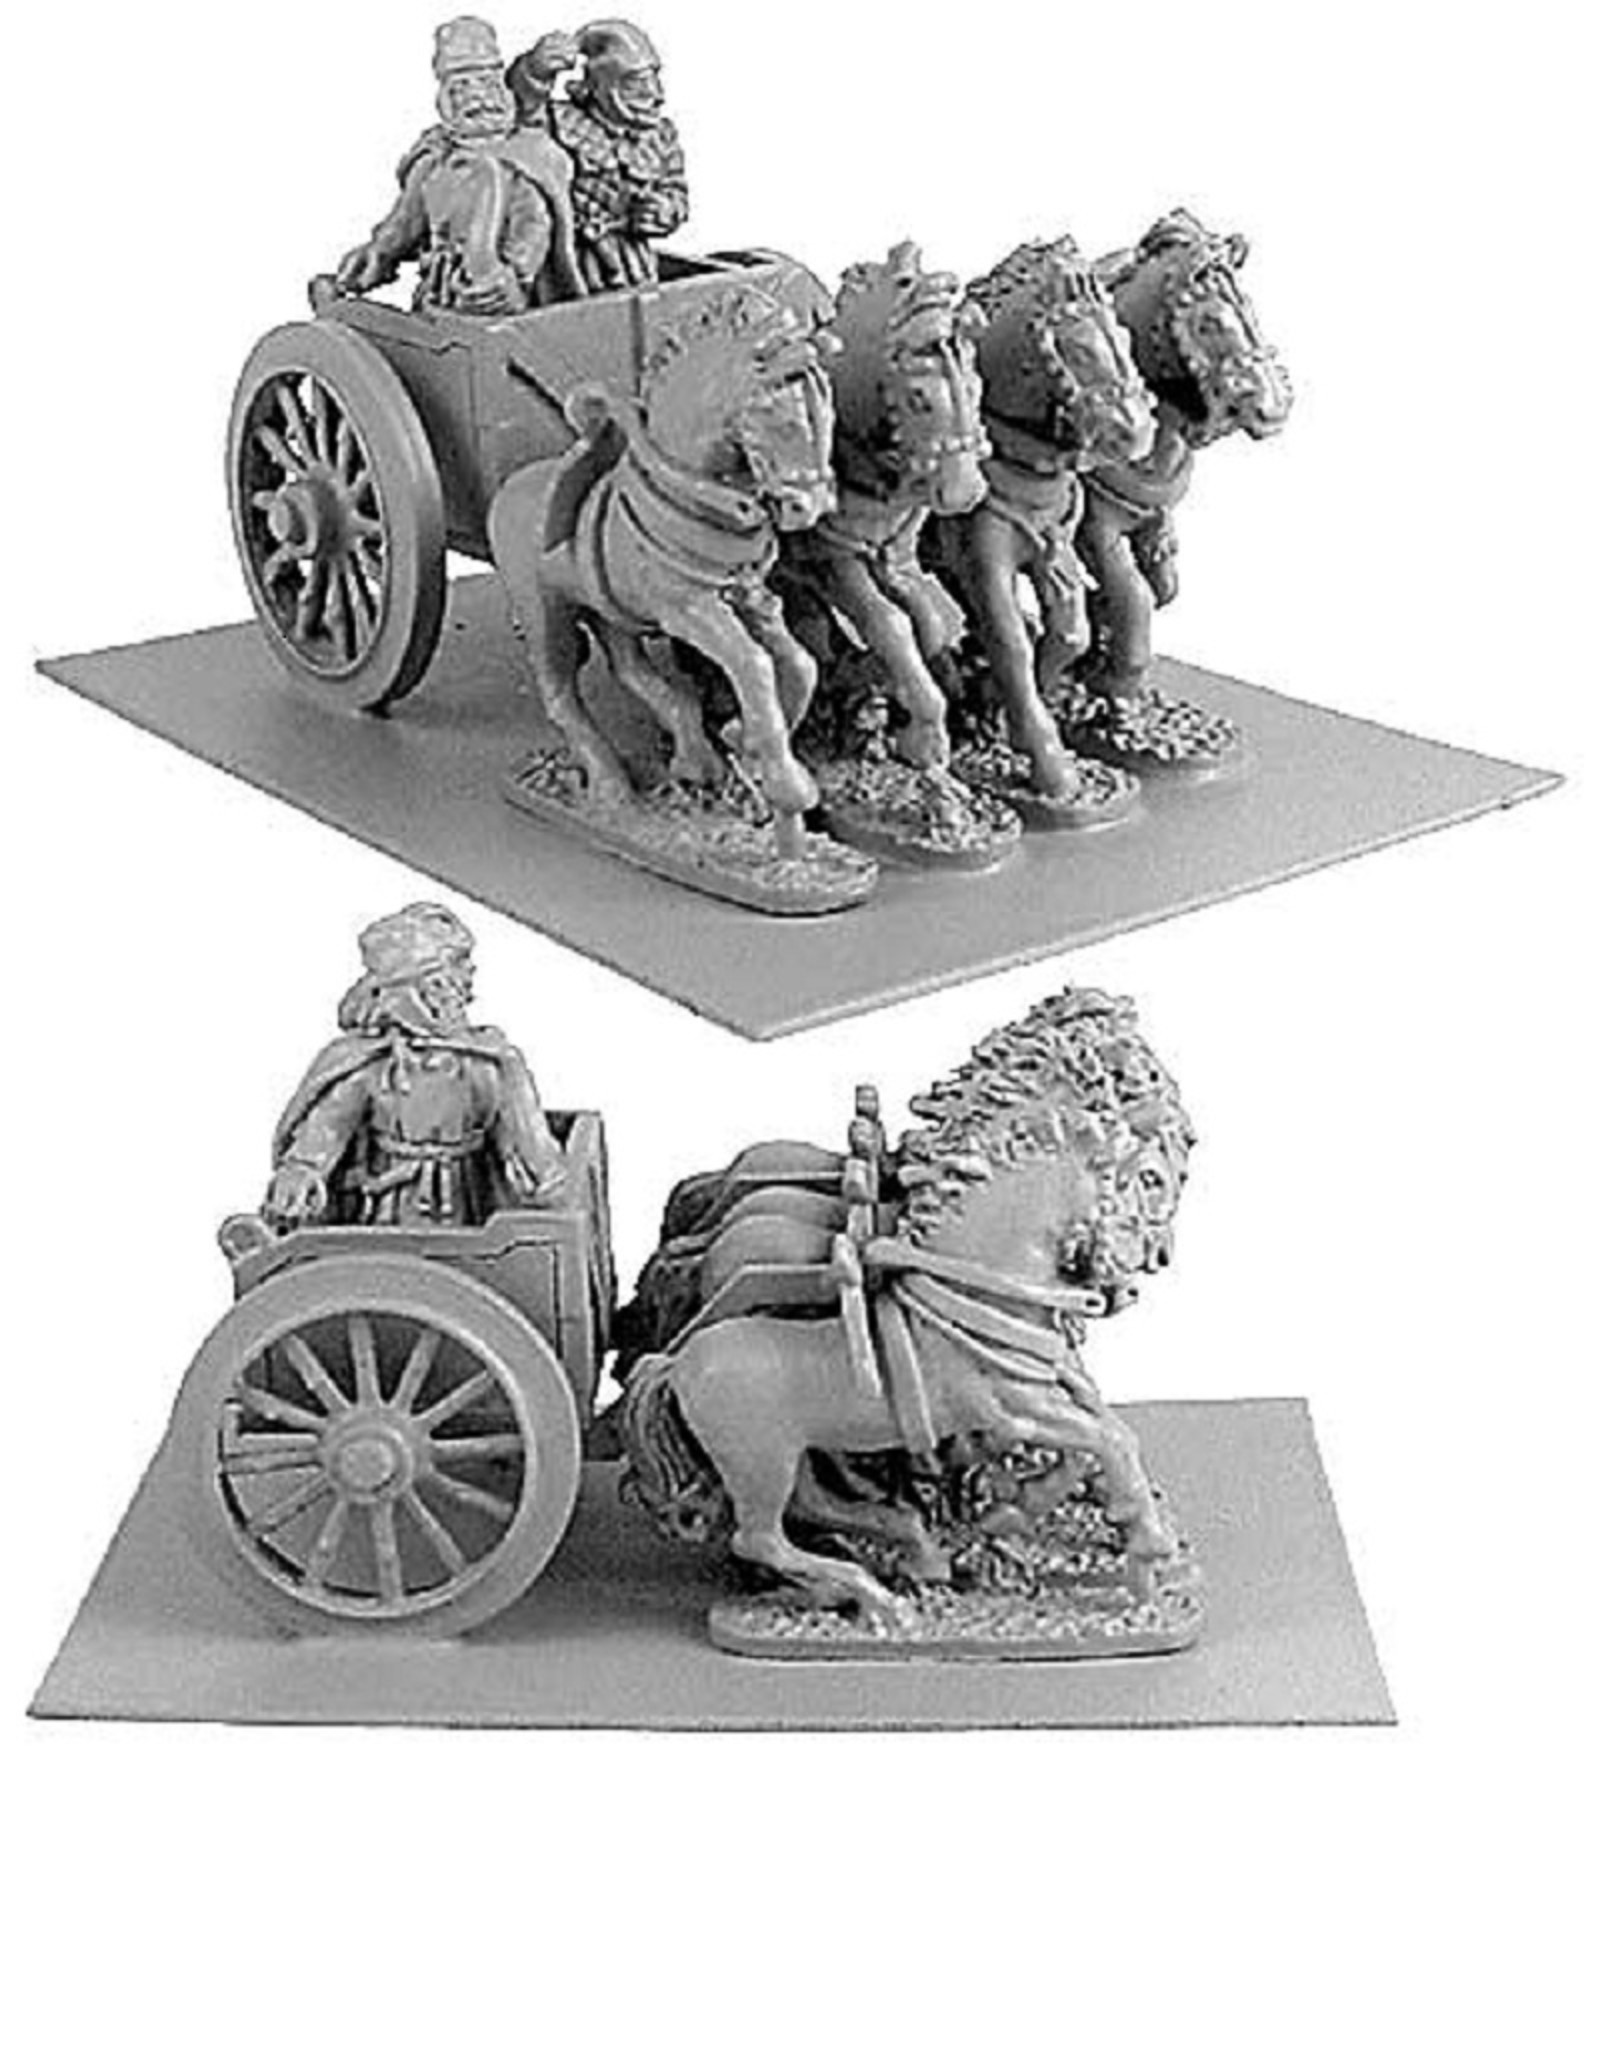 Xyston ANC20083 - Persian General in Four-Horsed Chariot